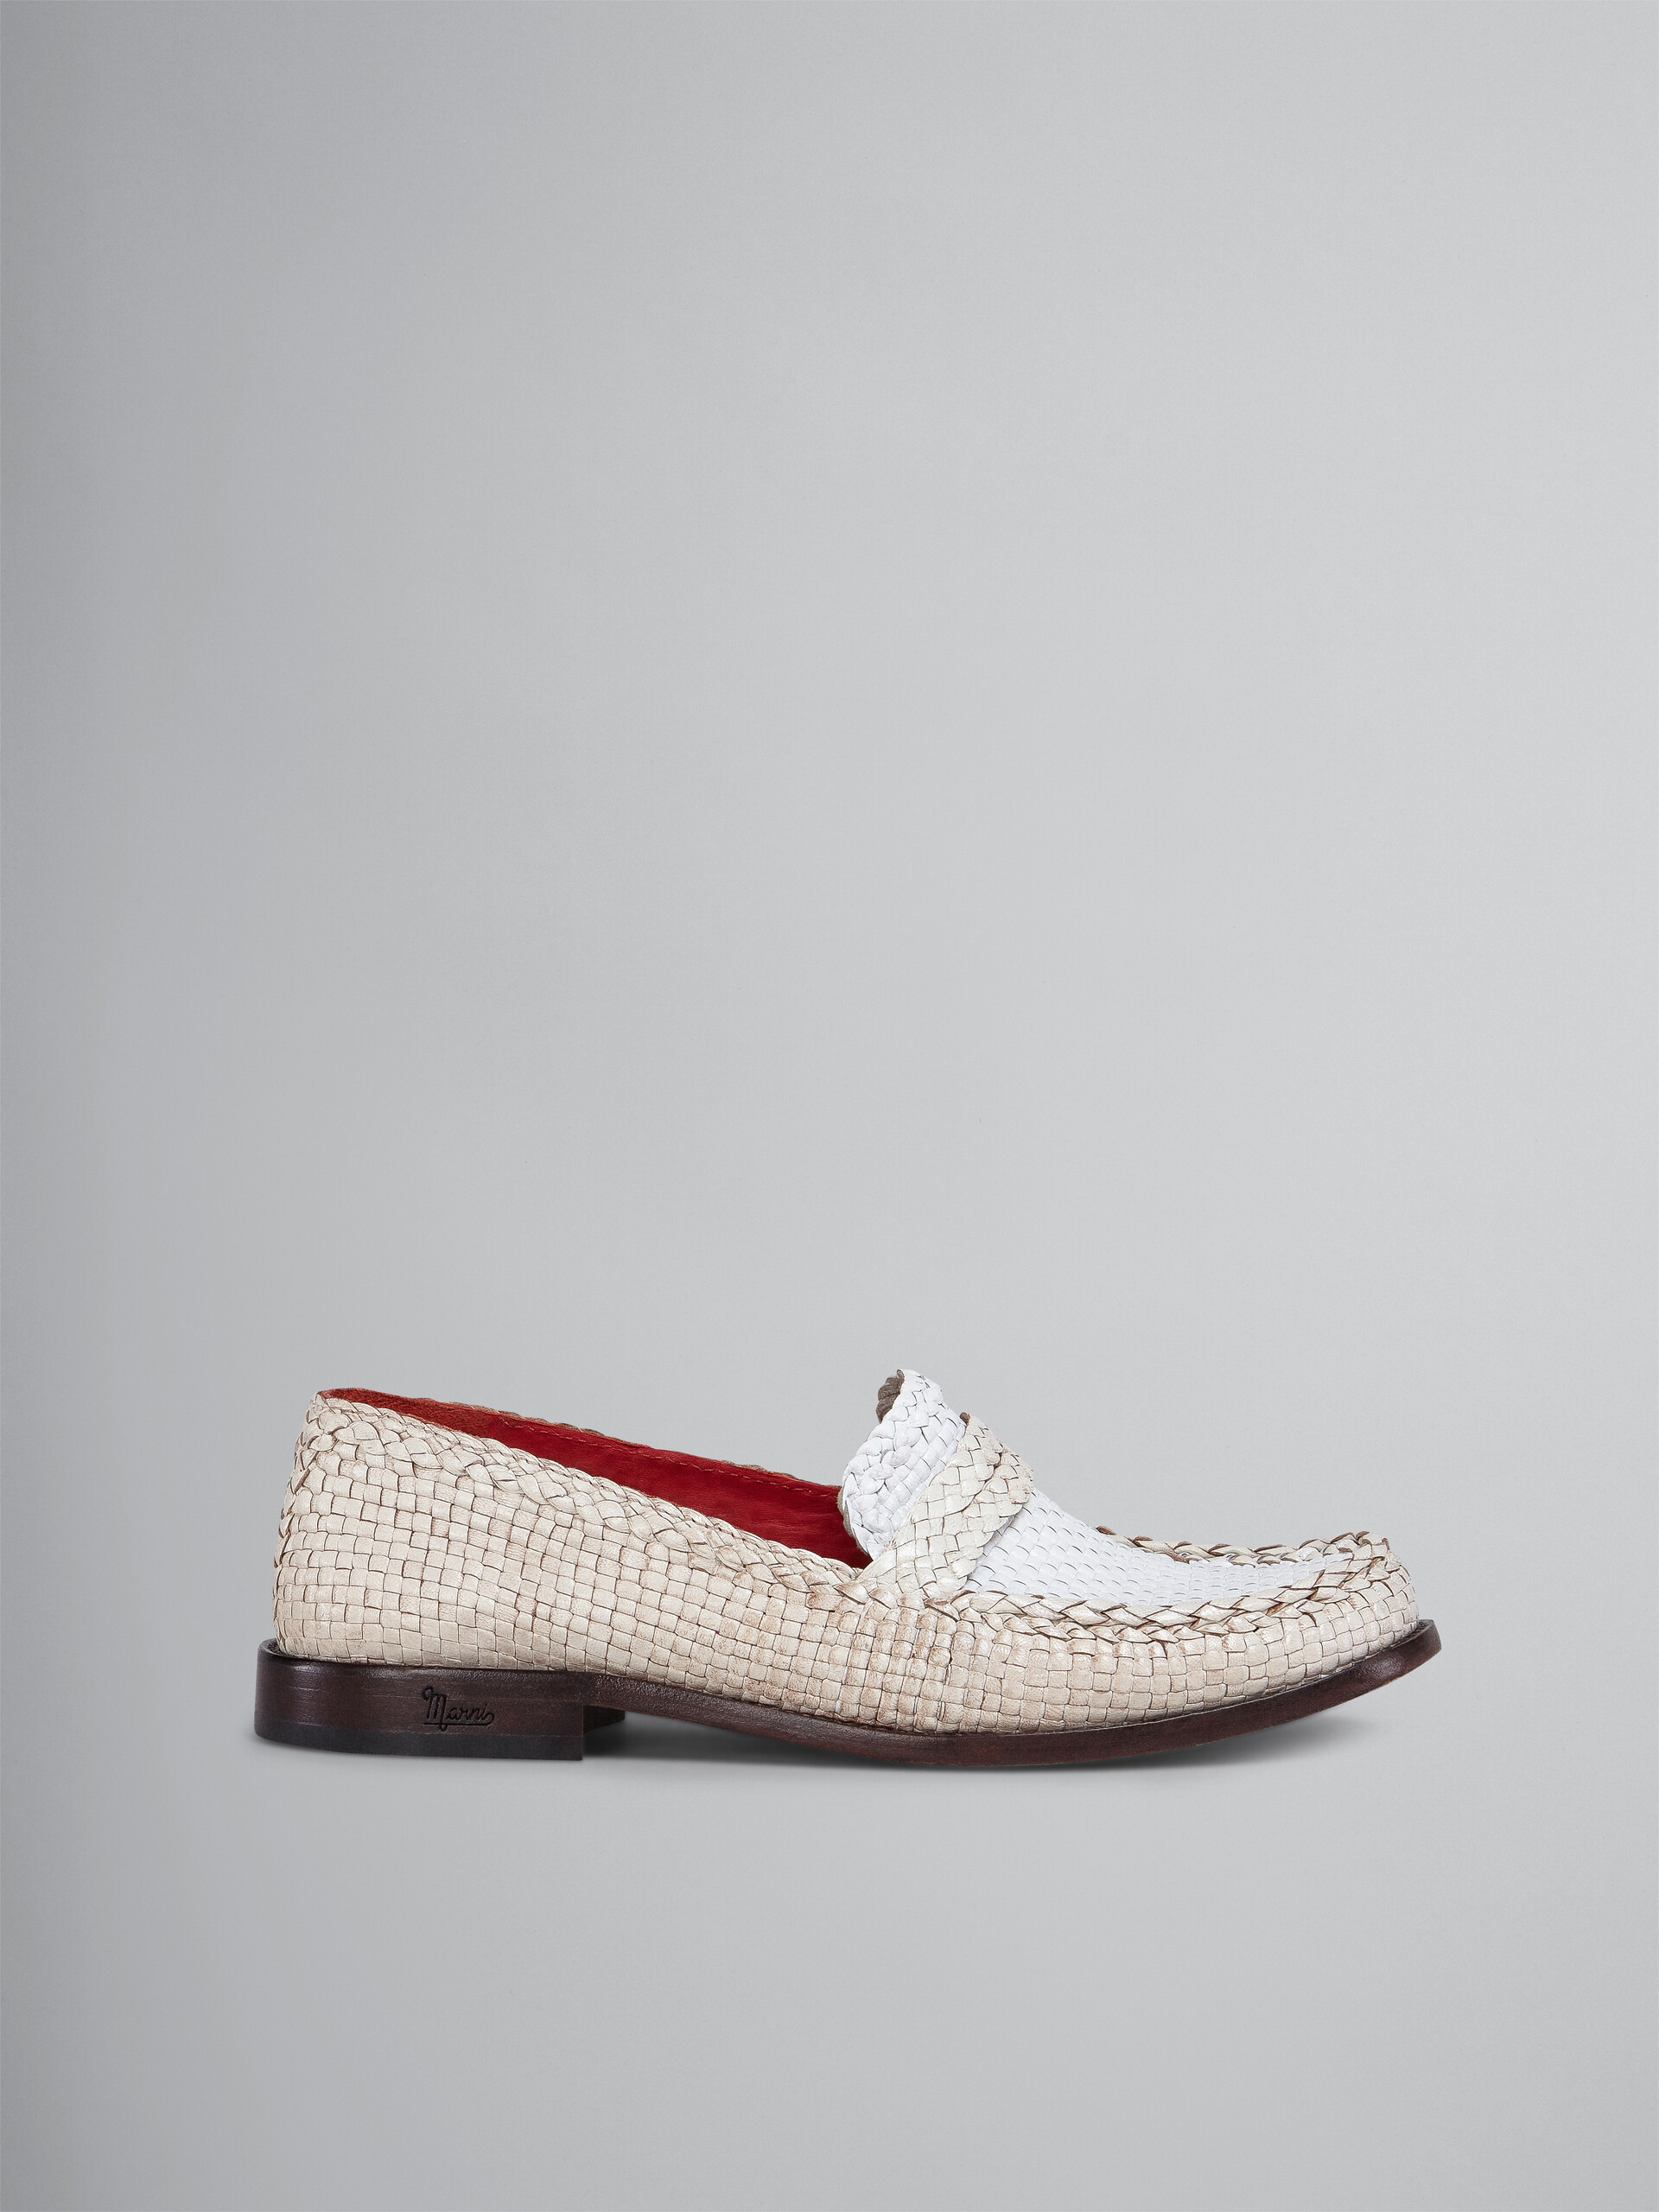 White woven leather moccasin - Mocassin - Image 1